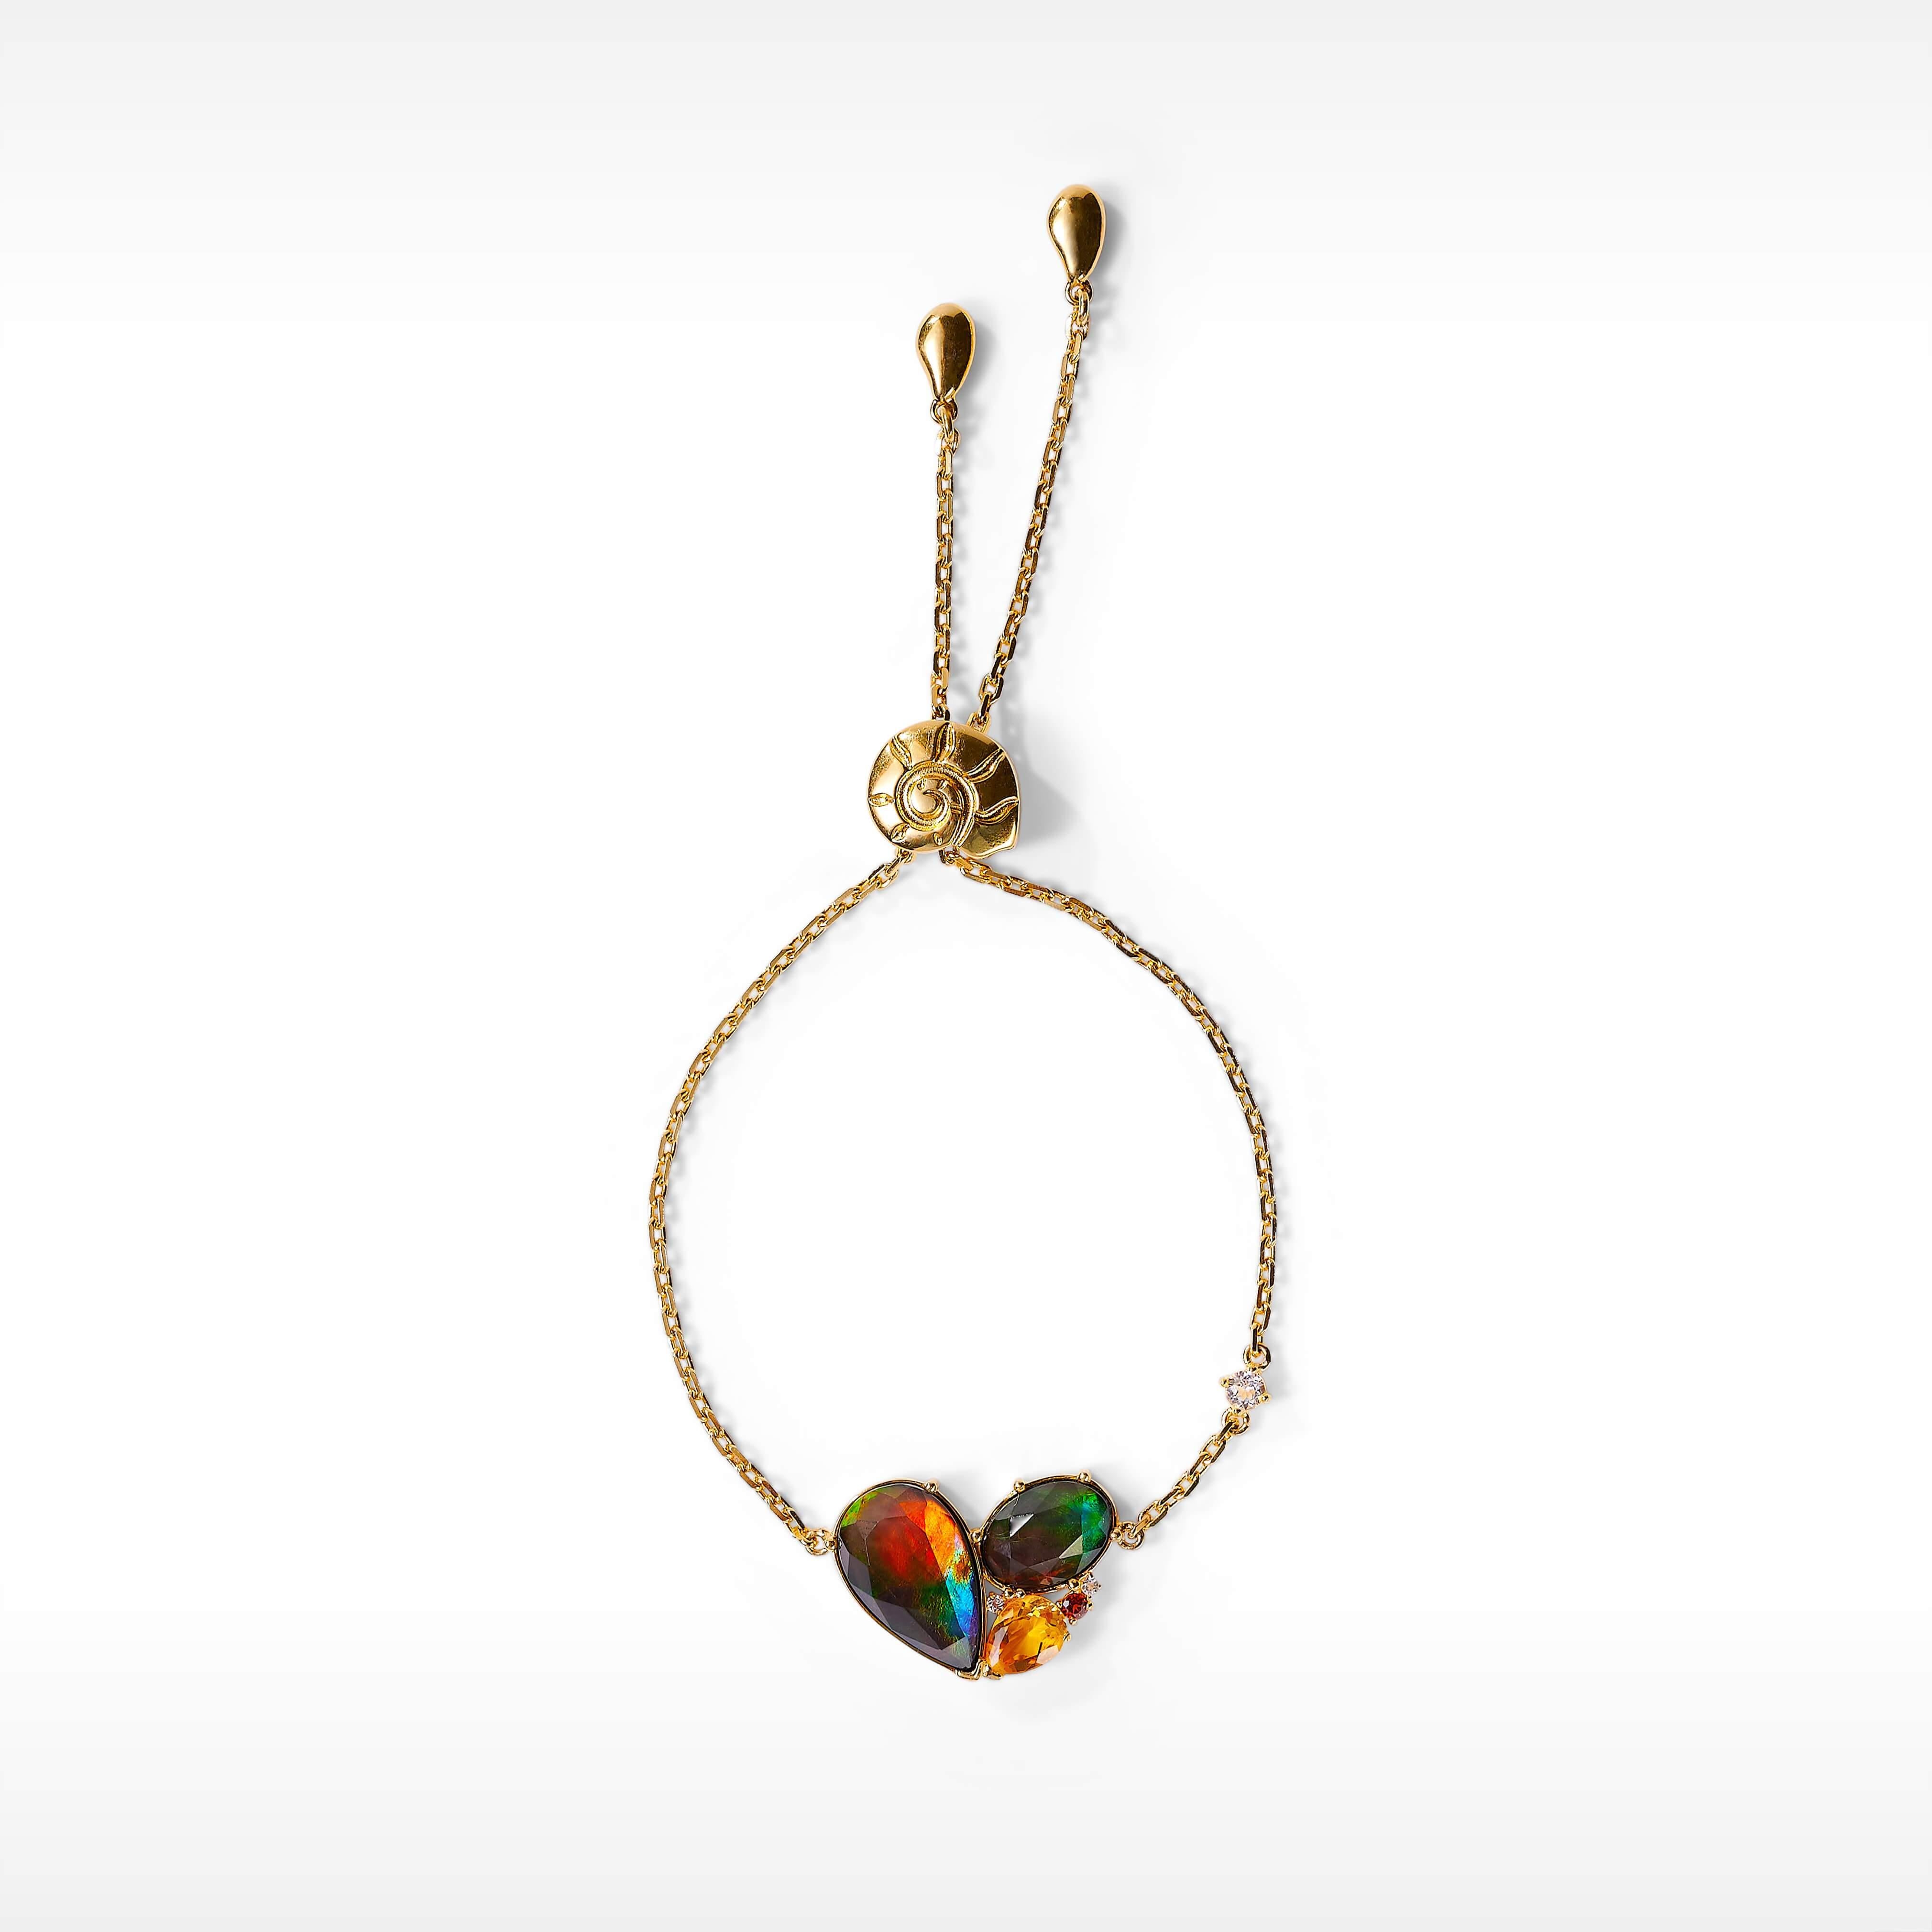 The Radiant collection features striking ammolite clustered with citrine, garnet and white topaz in a celebration of festive gathering seasons.

AA grade Ammolite
9.1mm x 15mm pear and 7.1mm x 10mm oval Ammolite bracelet
18K gold vermeil
Accented